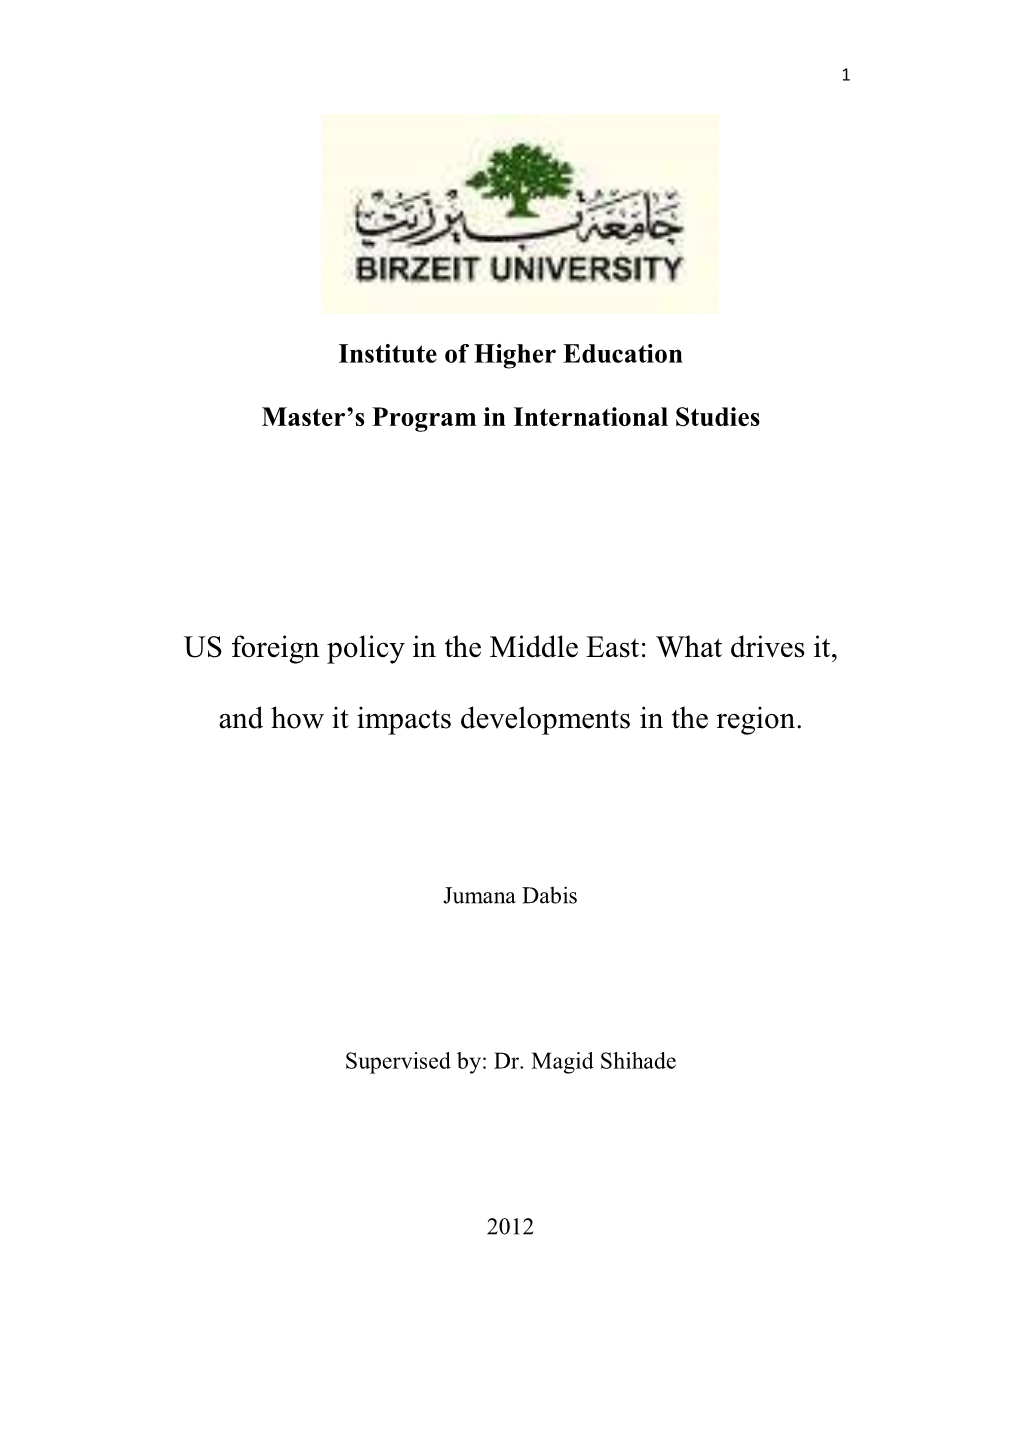 US Foreign Policy in the Middle East: What Drives It